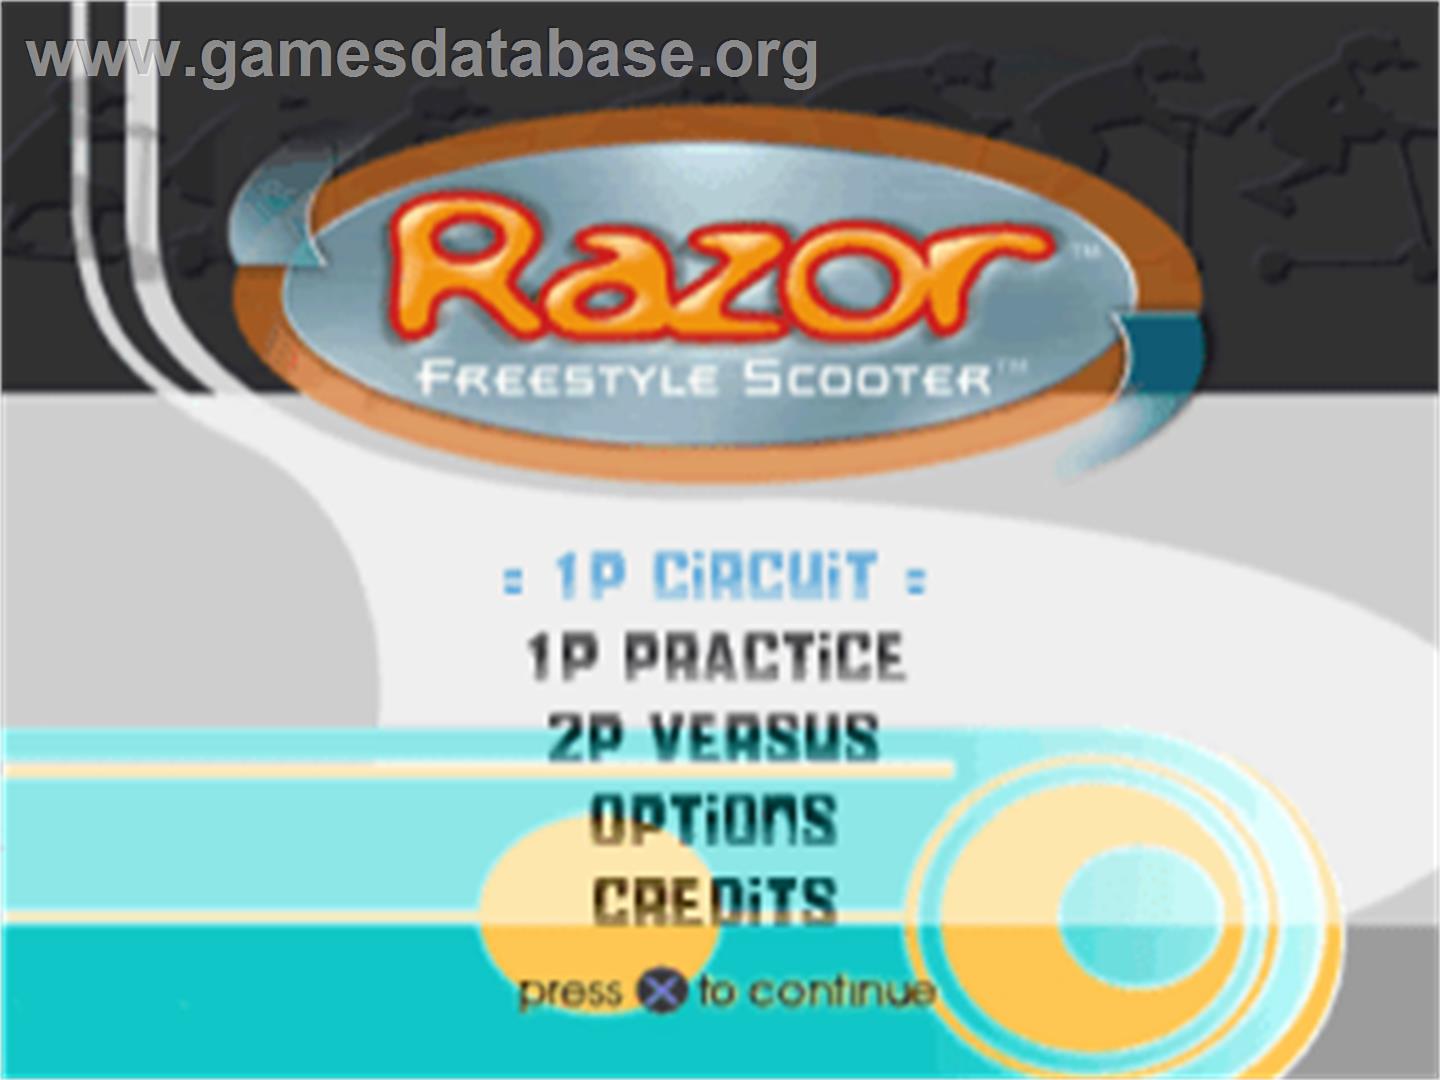 Razor Freestyle Scooter - Sony Playstation - Artwork - Title Screen